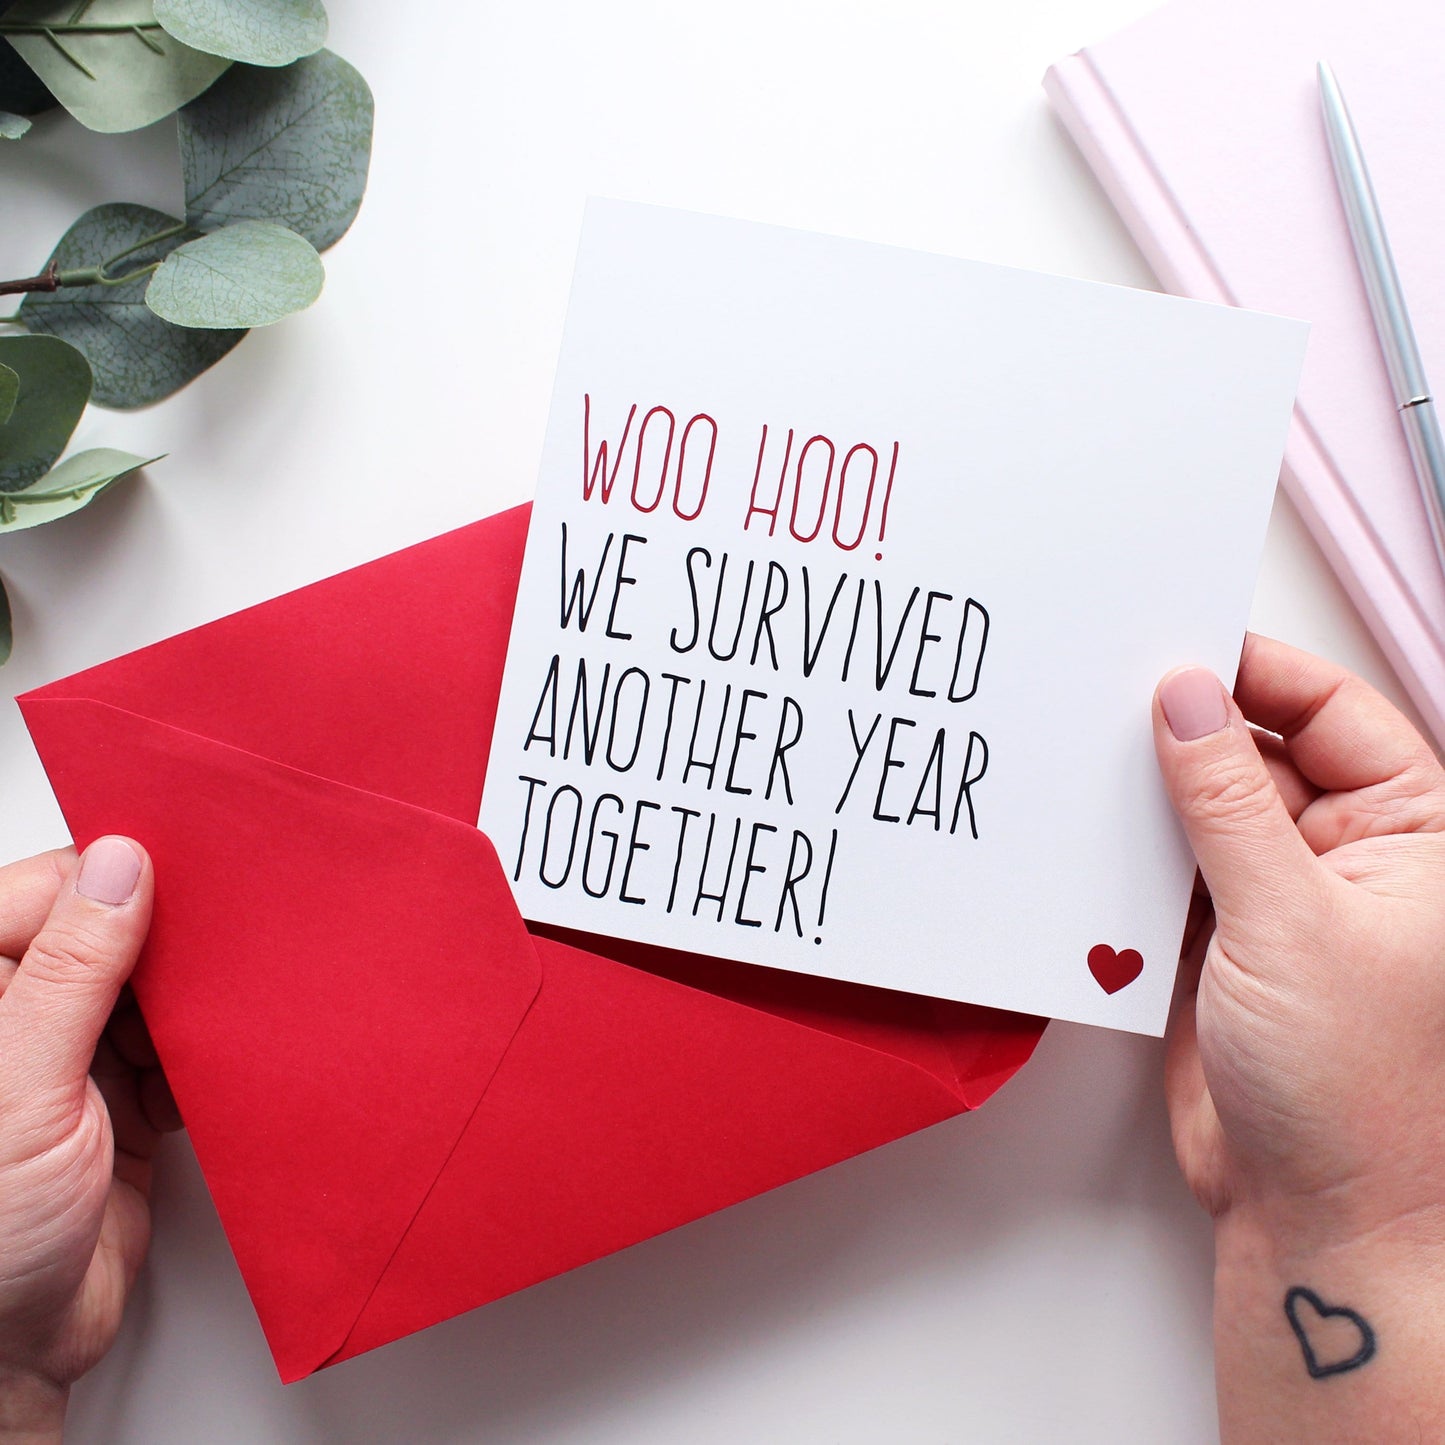 Survived another year together anniversary card